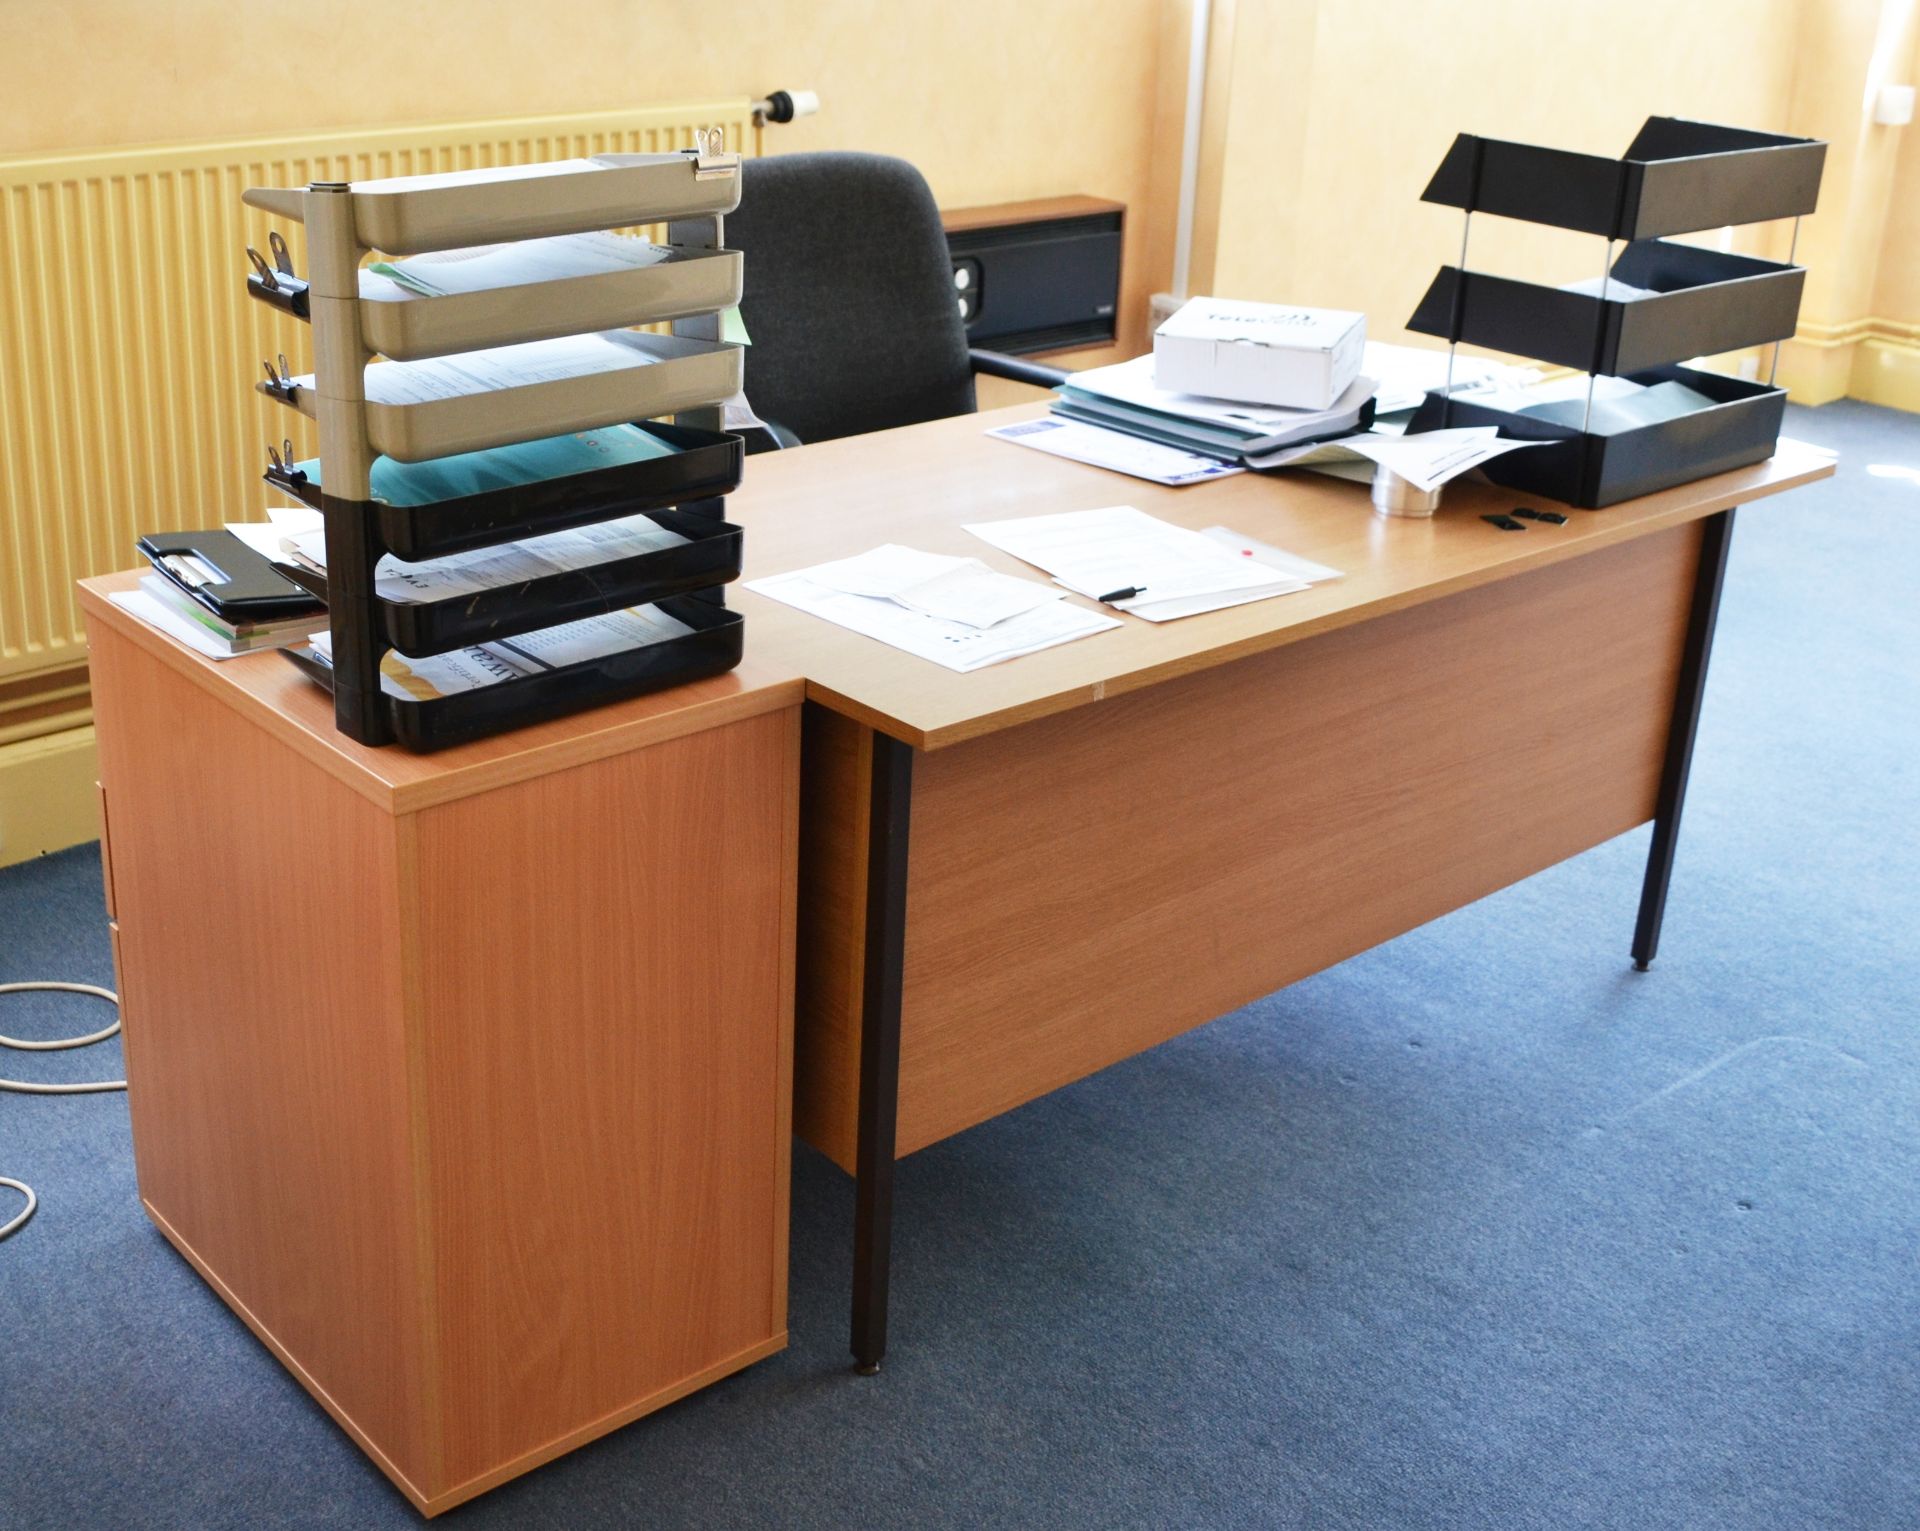 1 x Office Furniture Set Consisting Of 3 x Units - Ref: VM302 - CL409 - Location Wakefield WF16